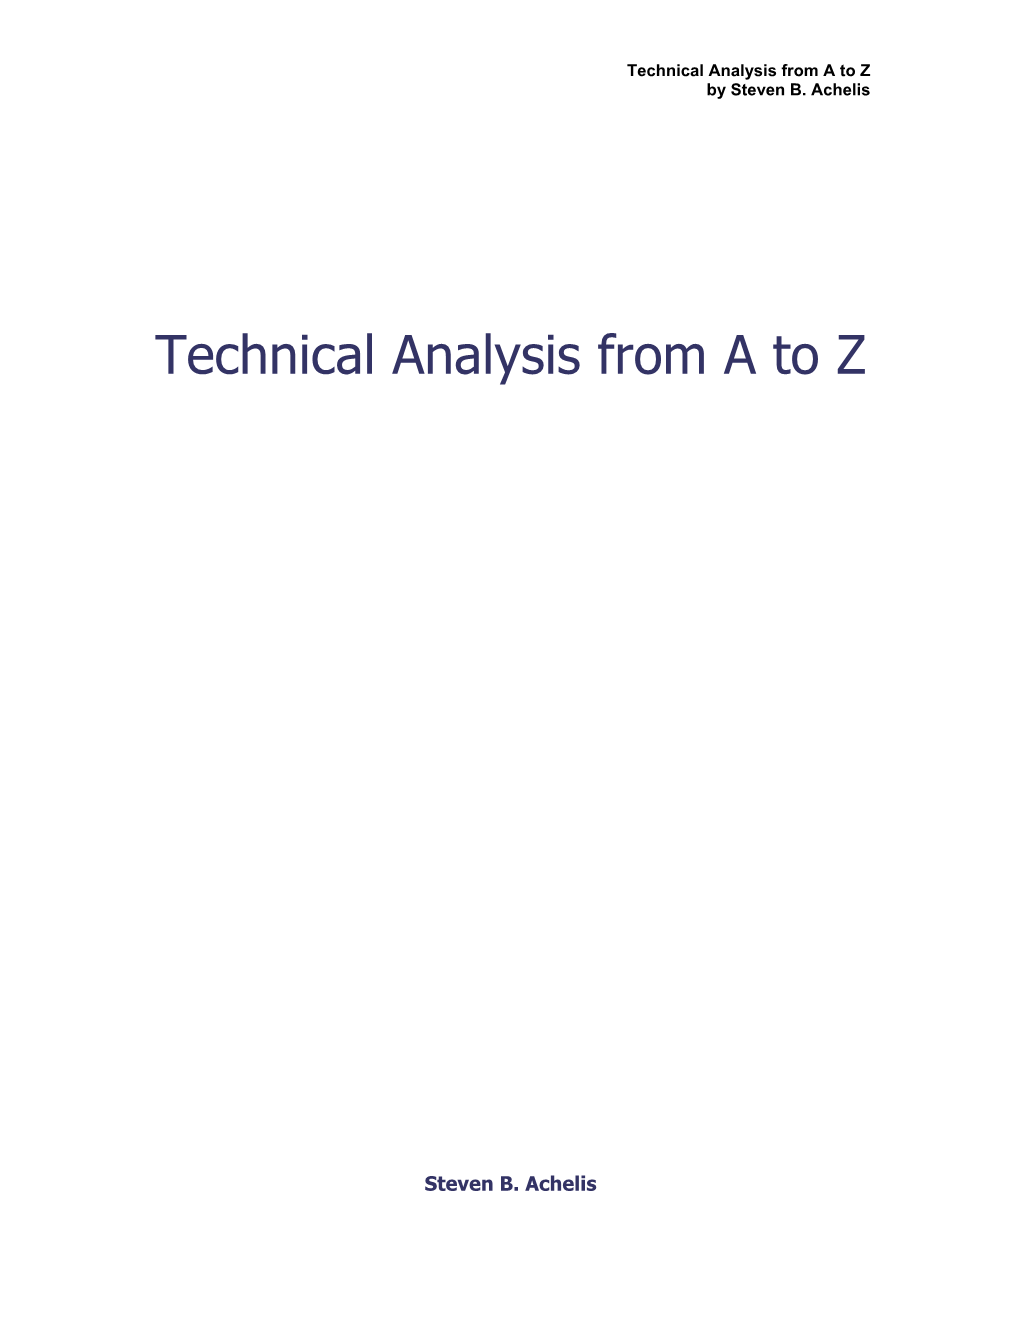 Technical Analysis from a to Z by Steven B